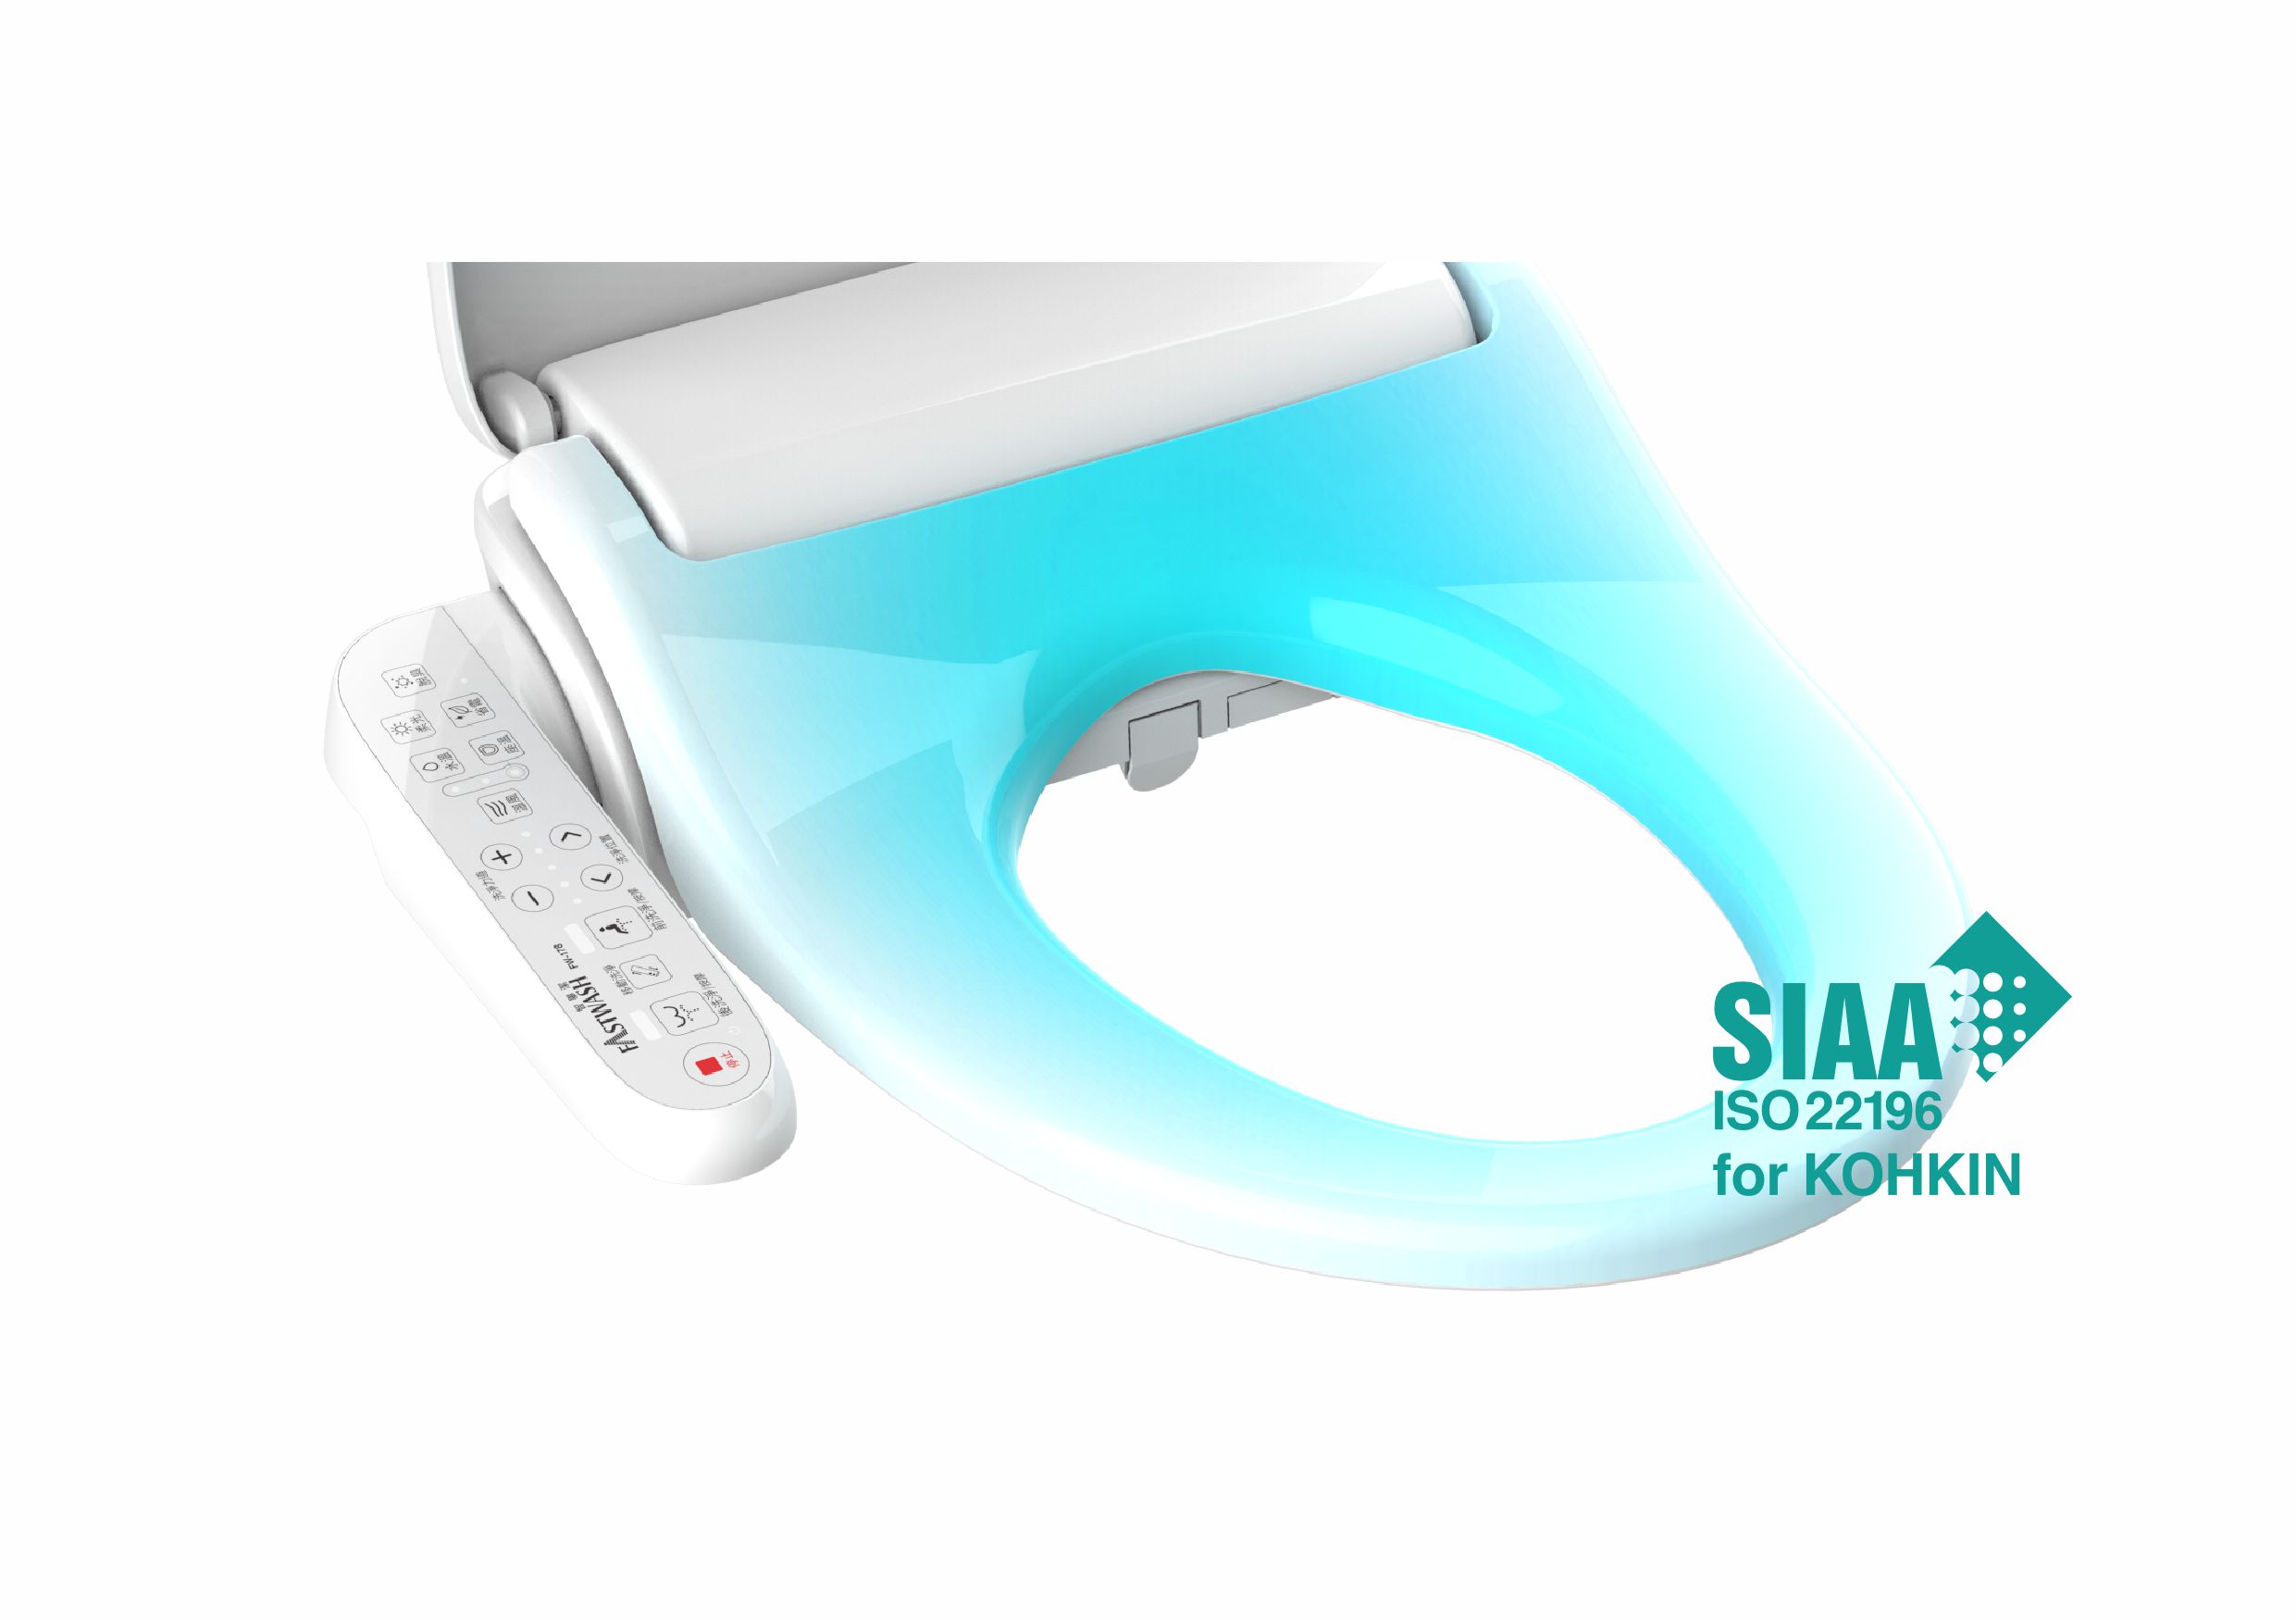  Hygienic Cleaning by using Smart Toilet Seat